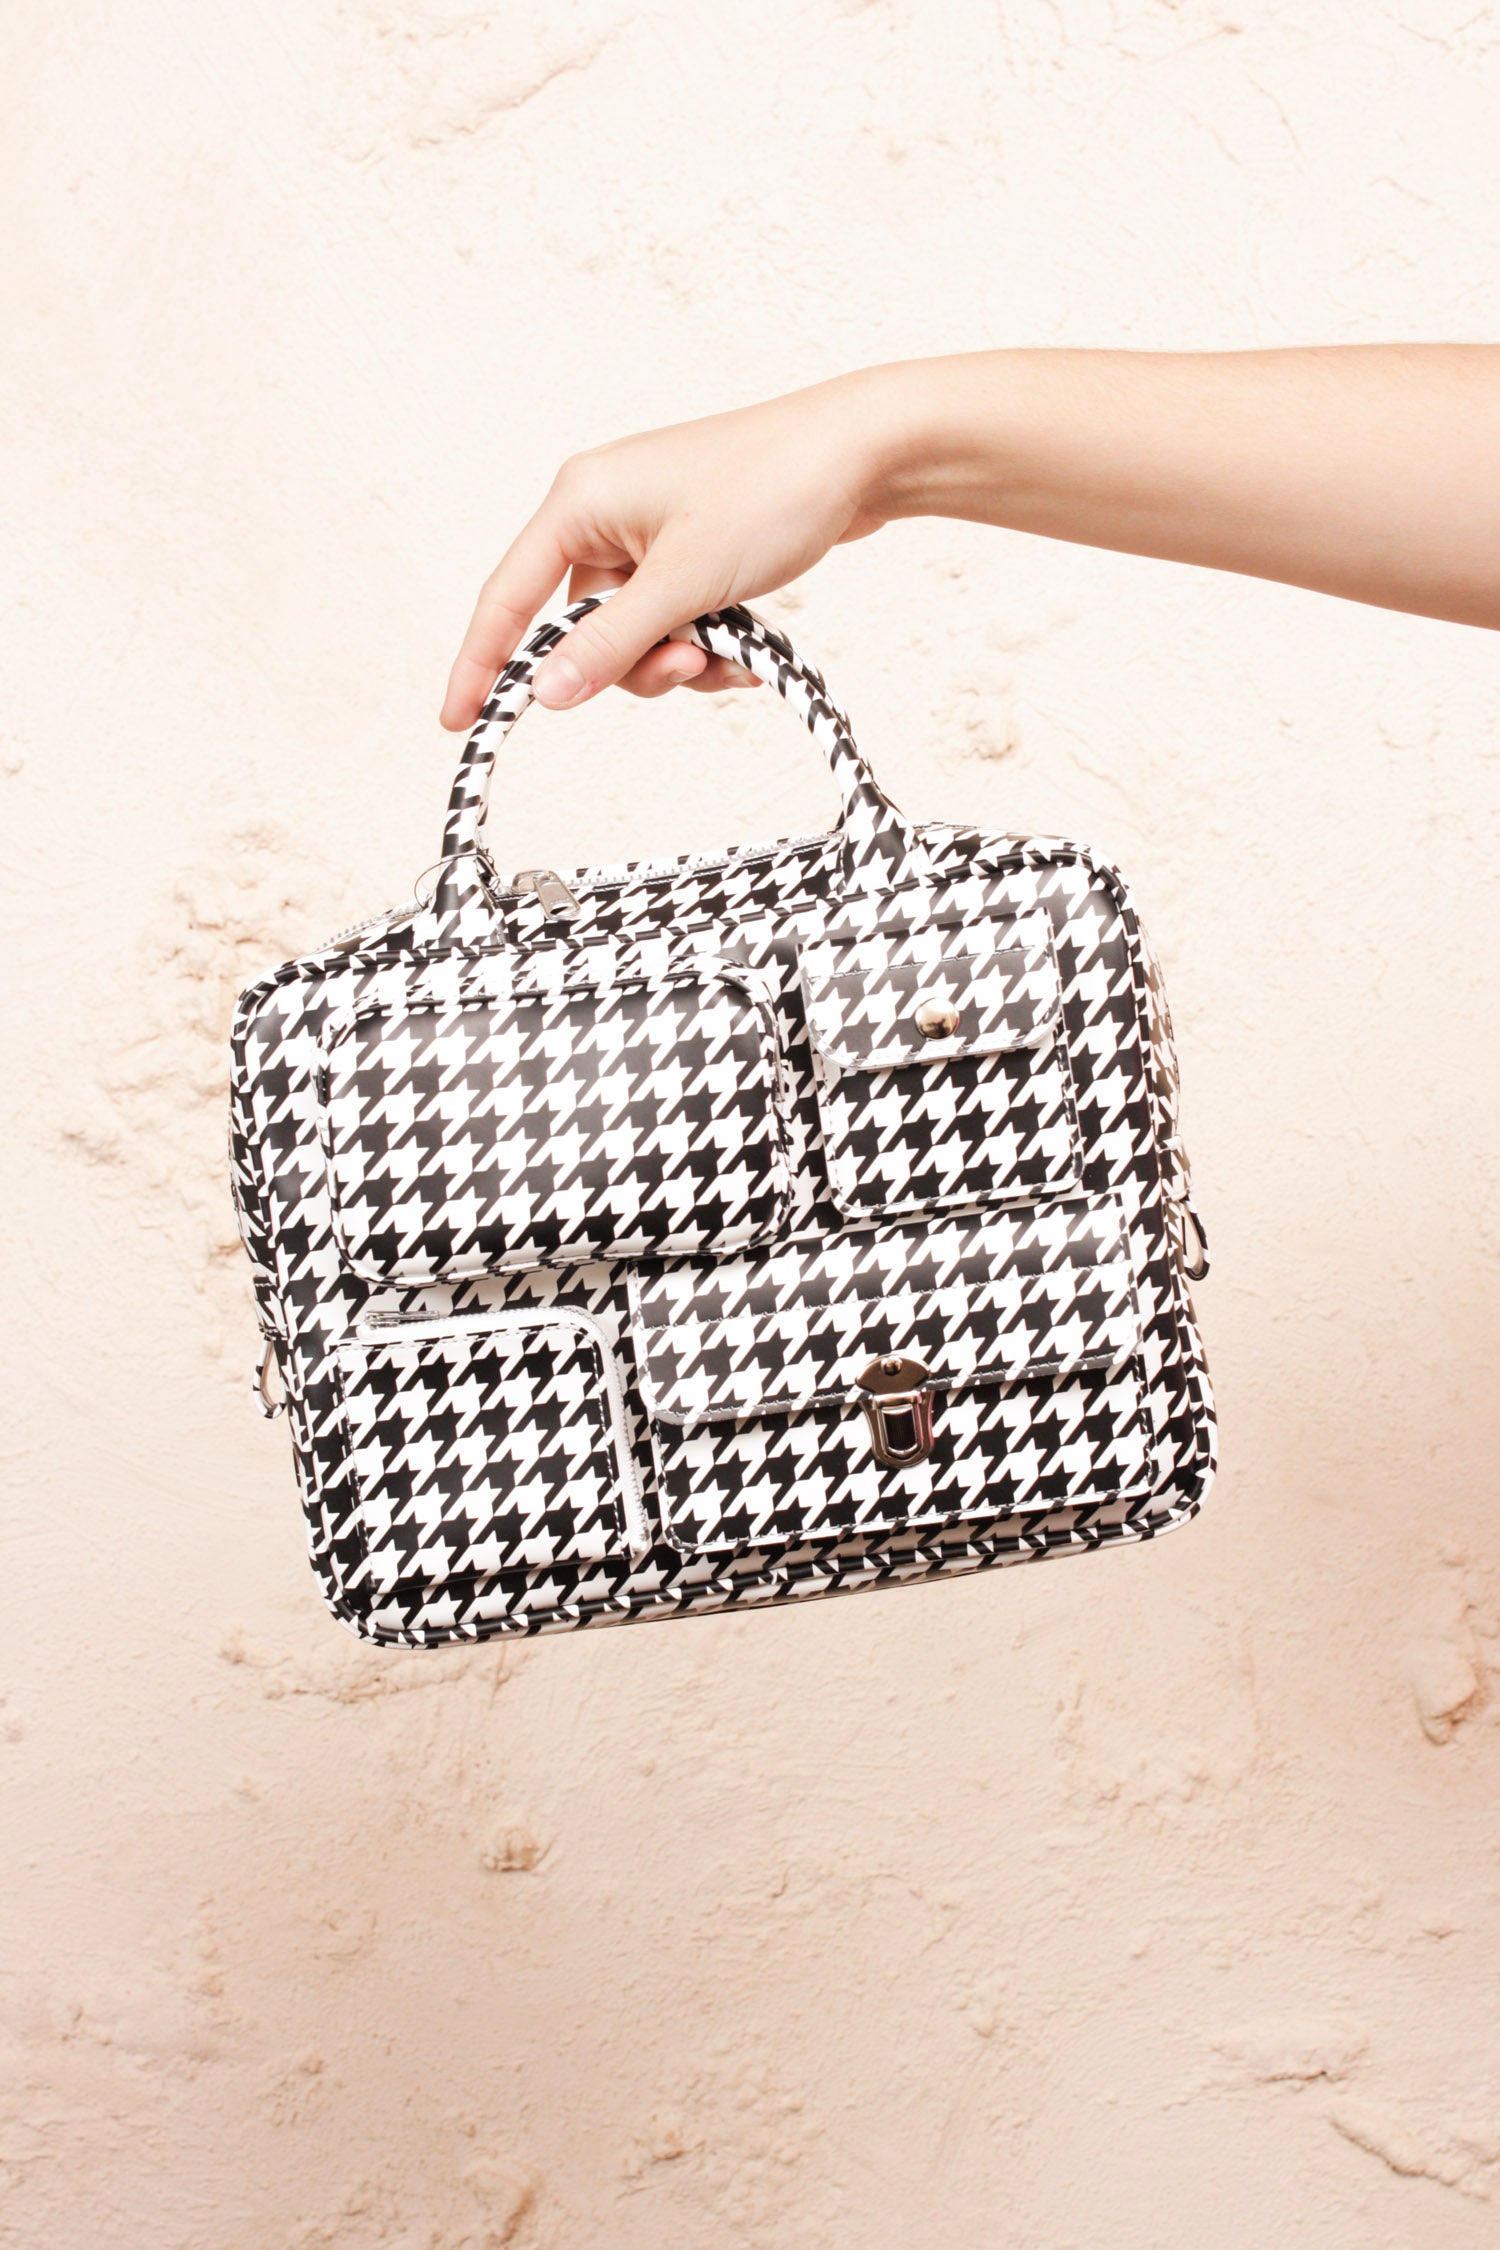 Dilone Houndstooth Double Flap Shoulder Bag - White